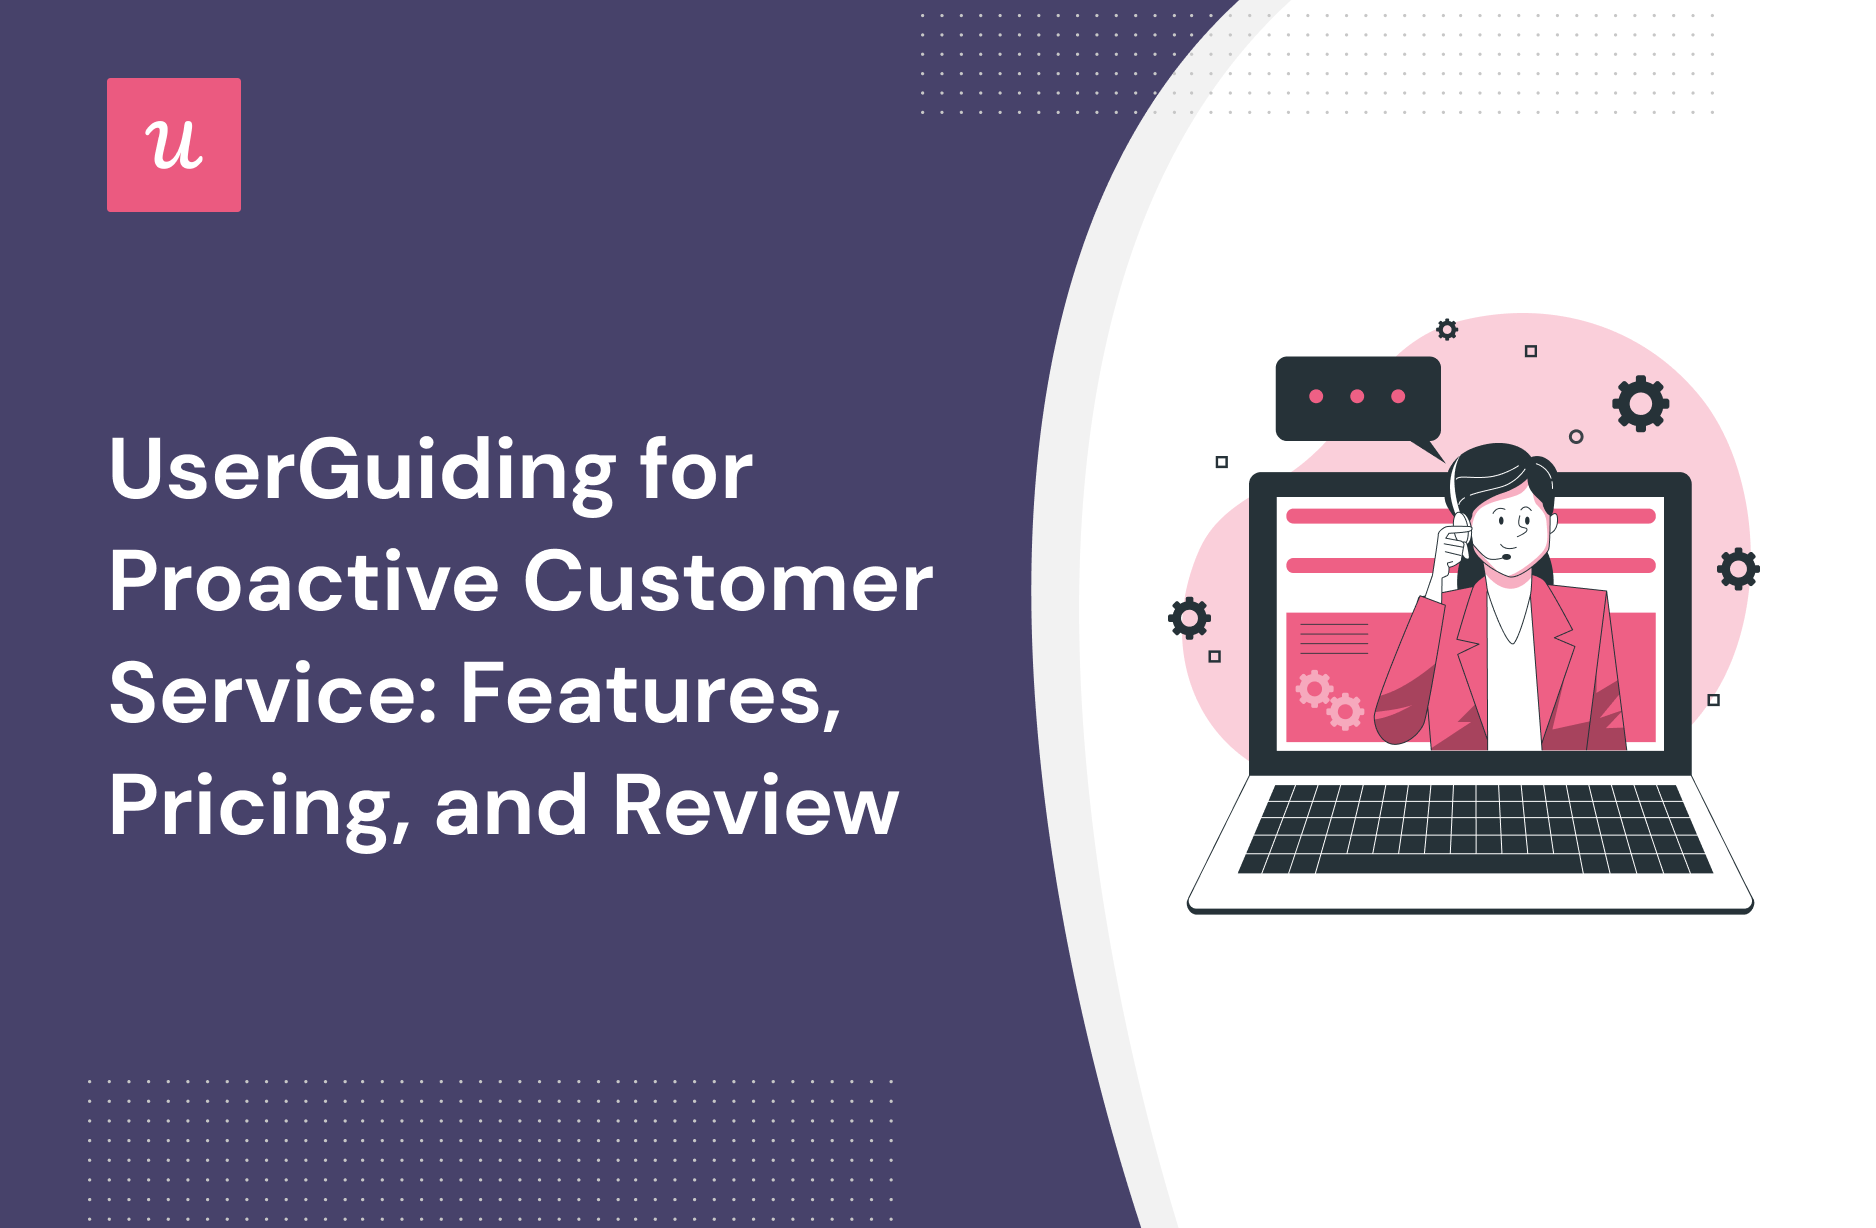 UserGuiding for Proactive Customer Service: Features, Pricing, and Review